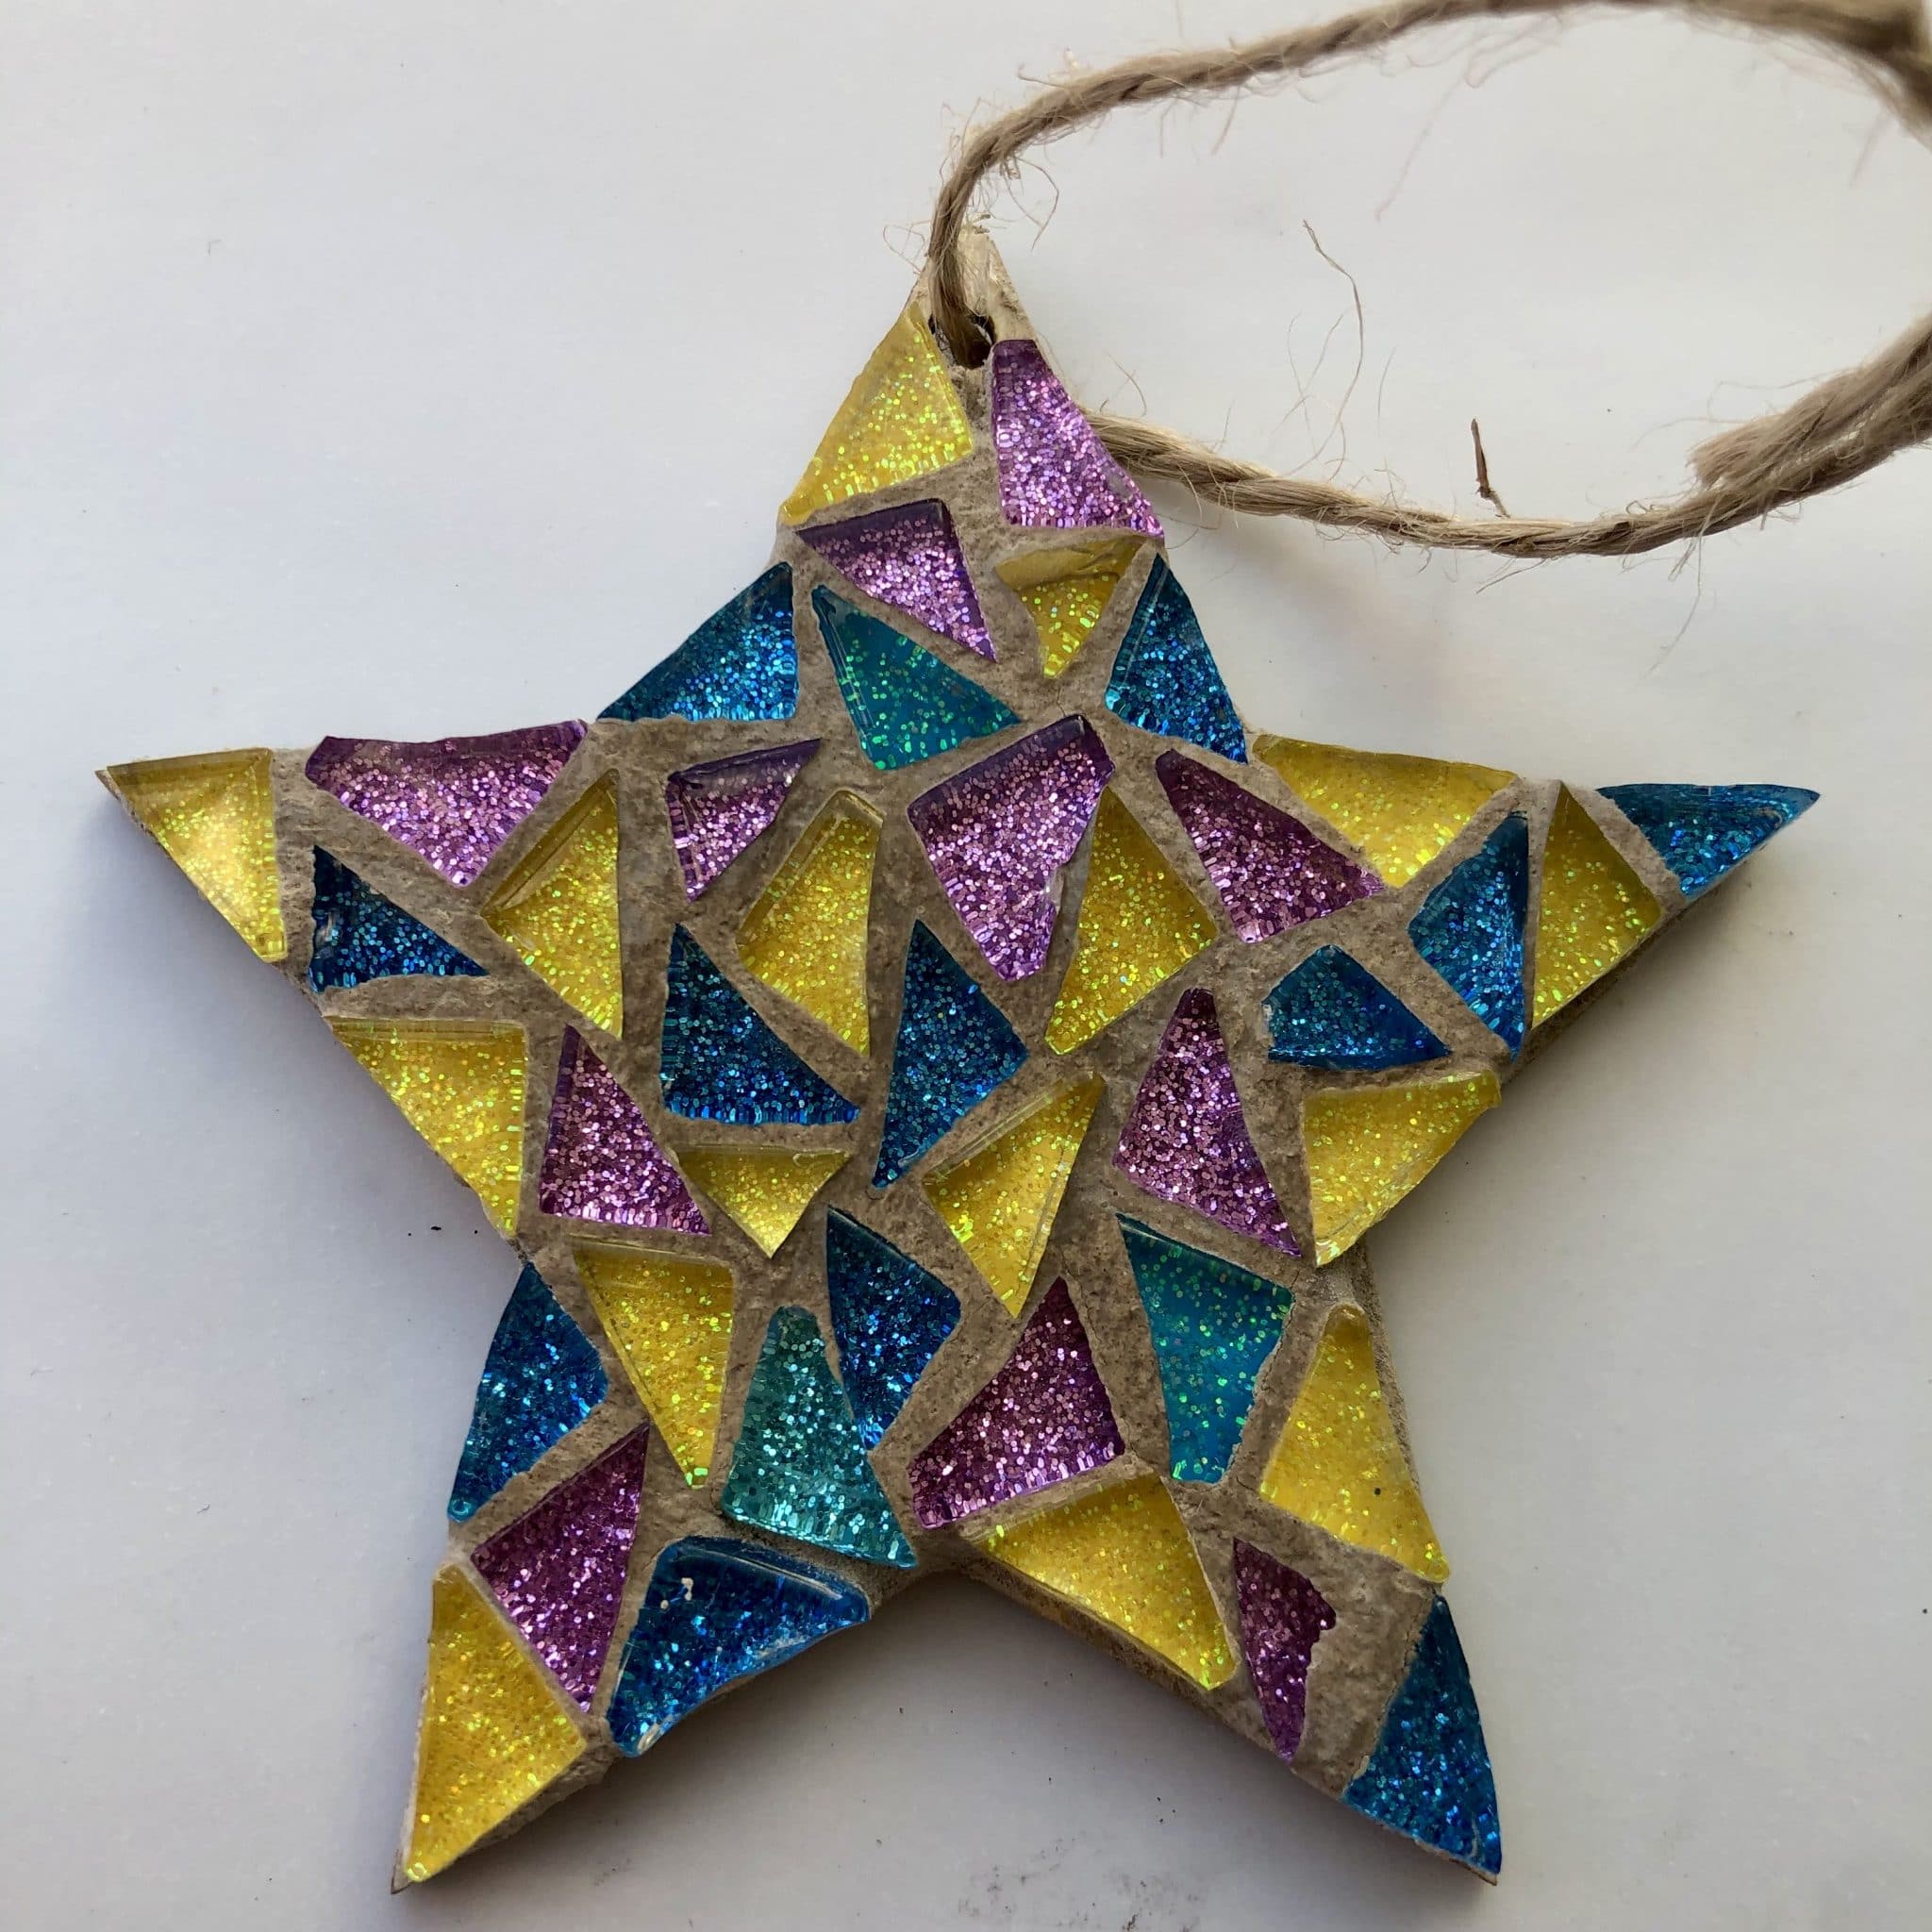 Small star mosaic with blue, yellow and pink colours with string